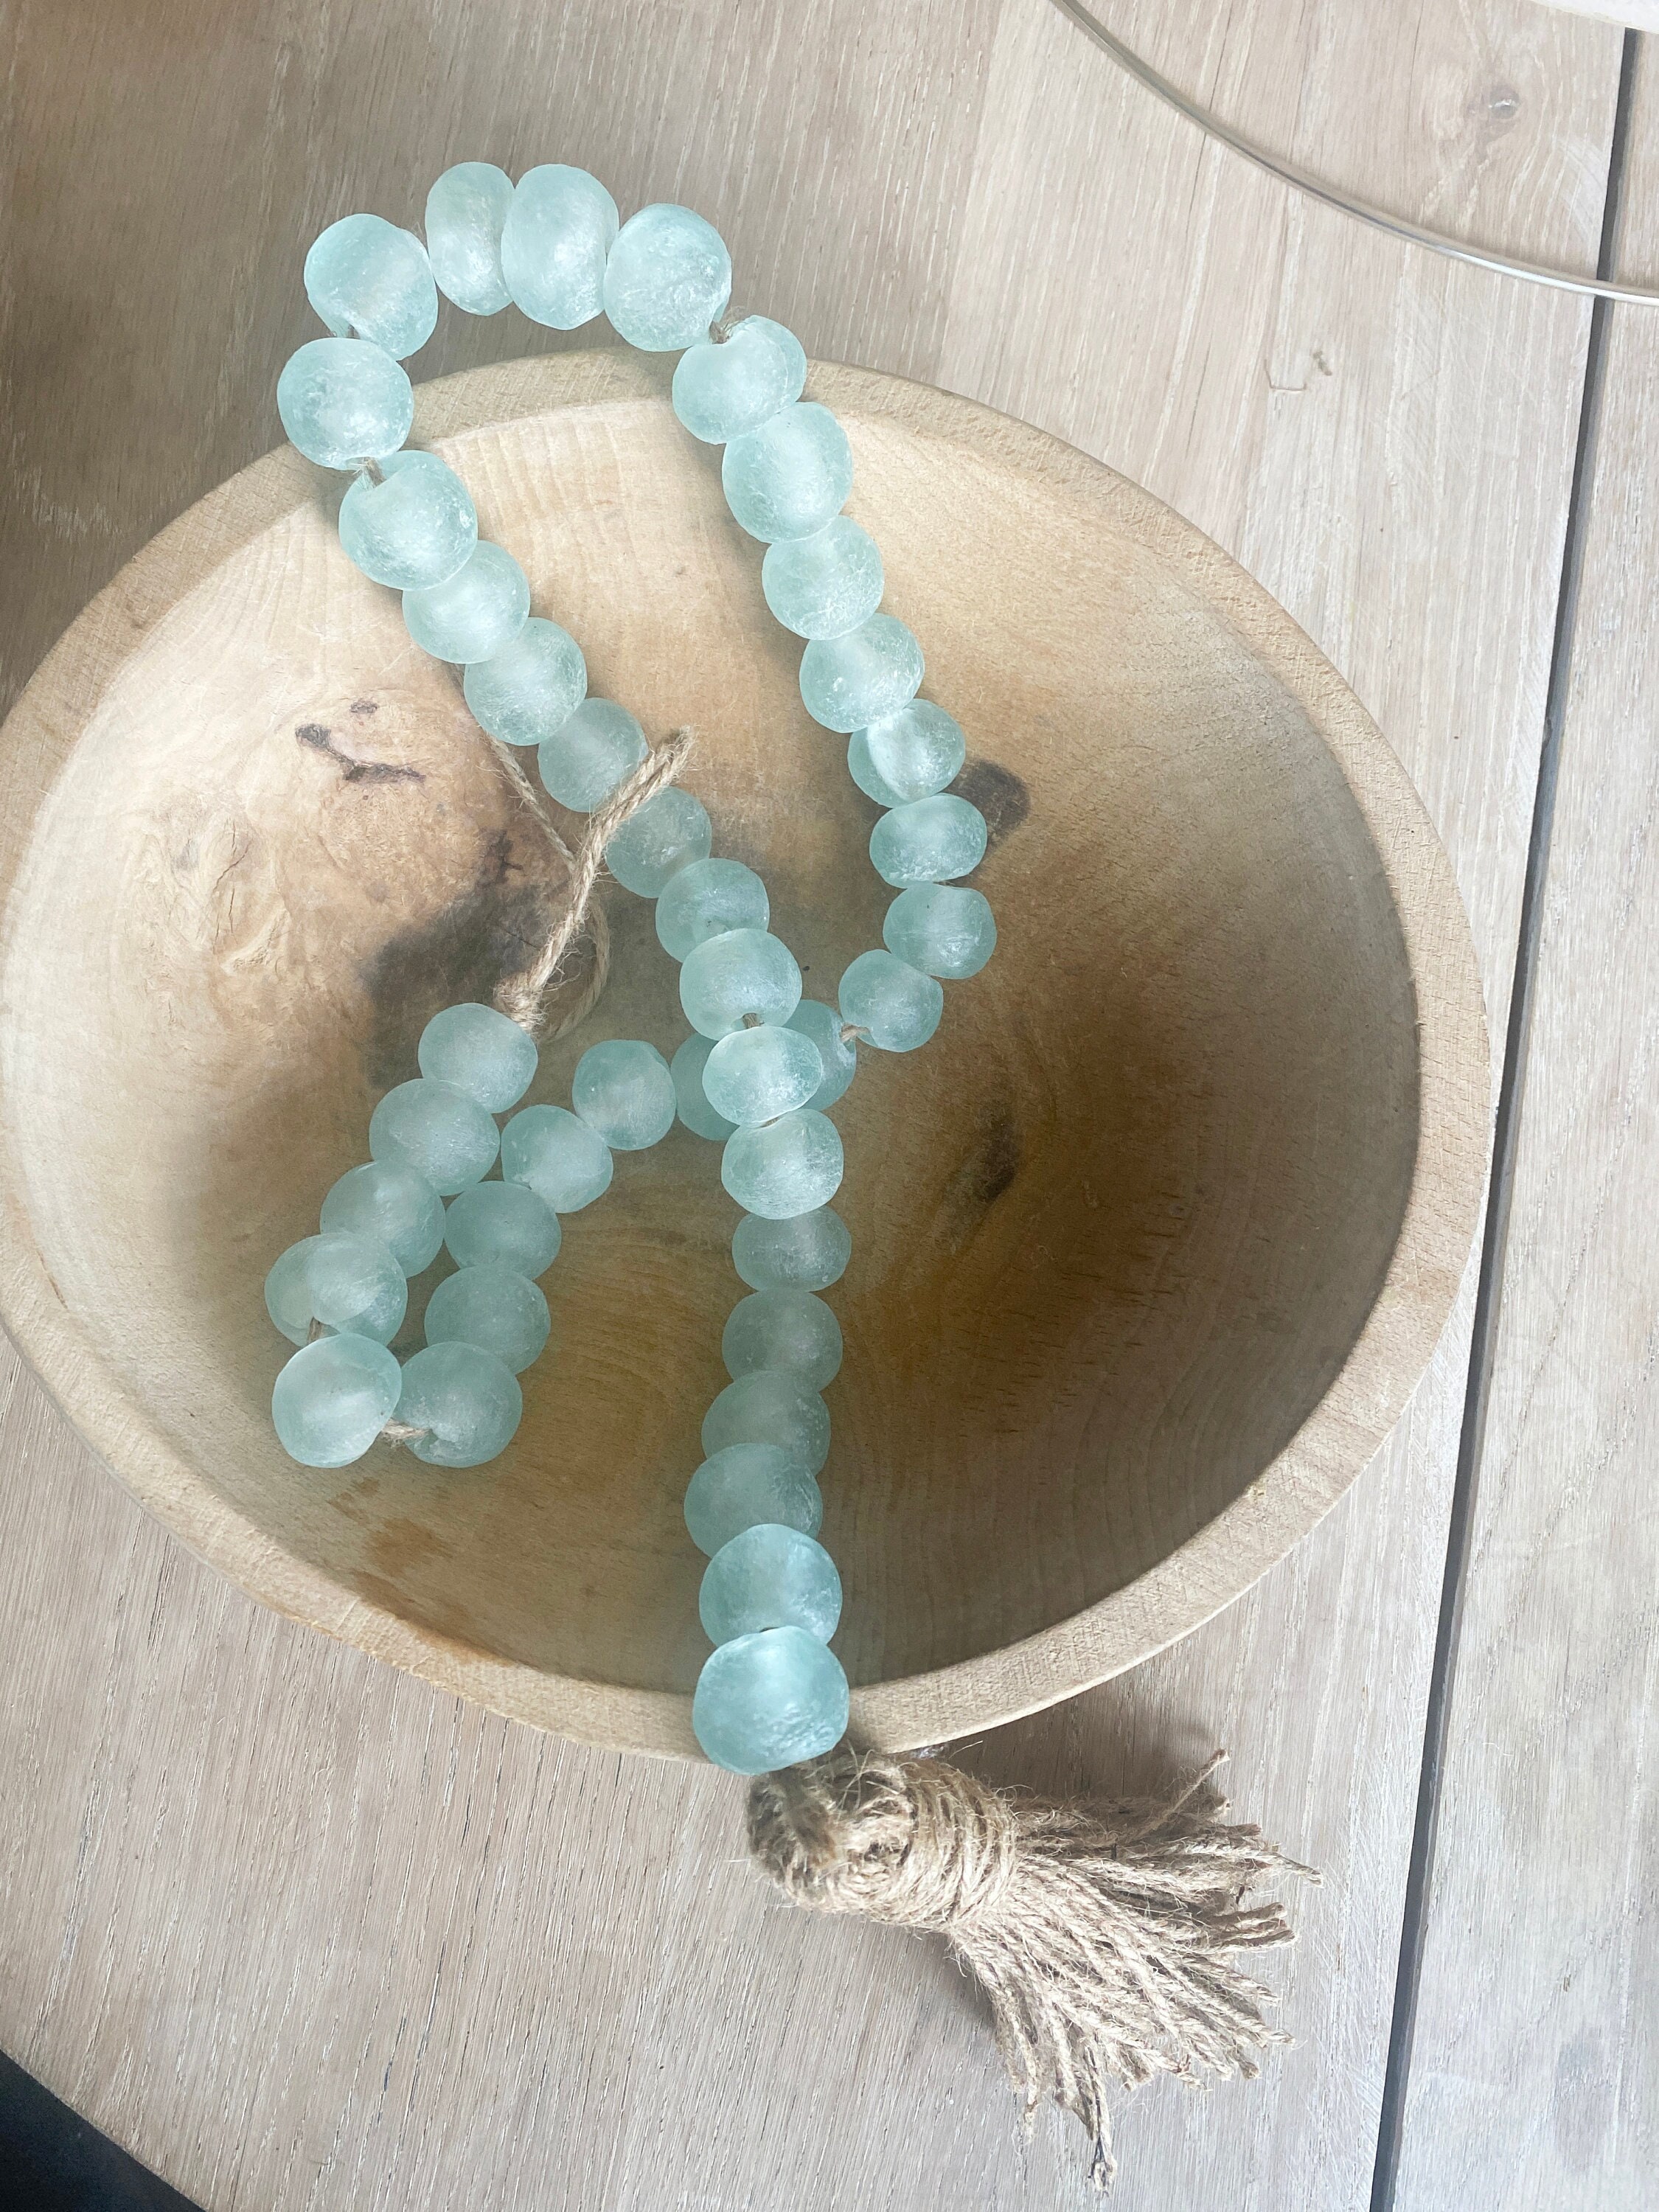 Large Sea Glass Beads in Celadon